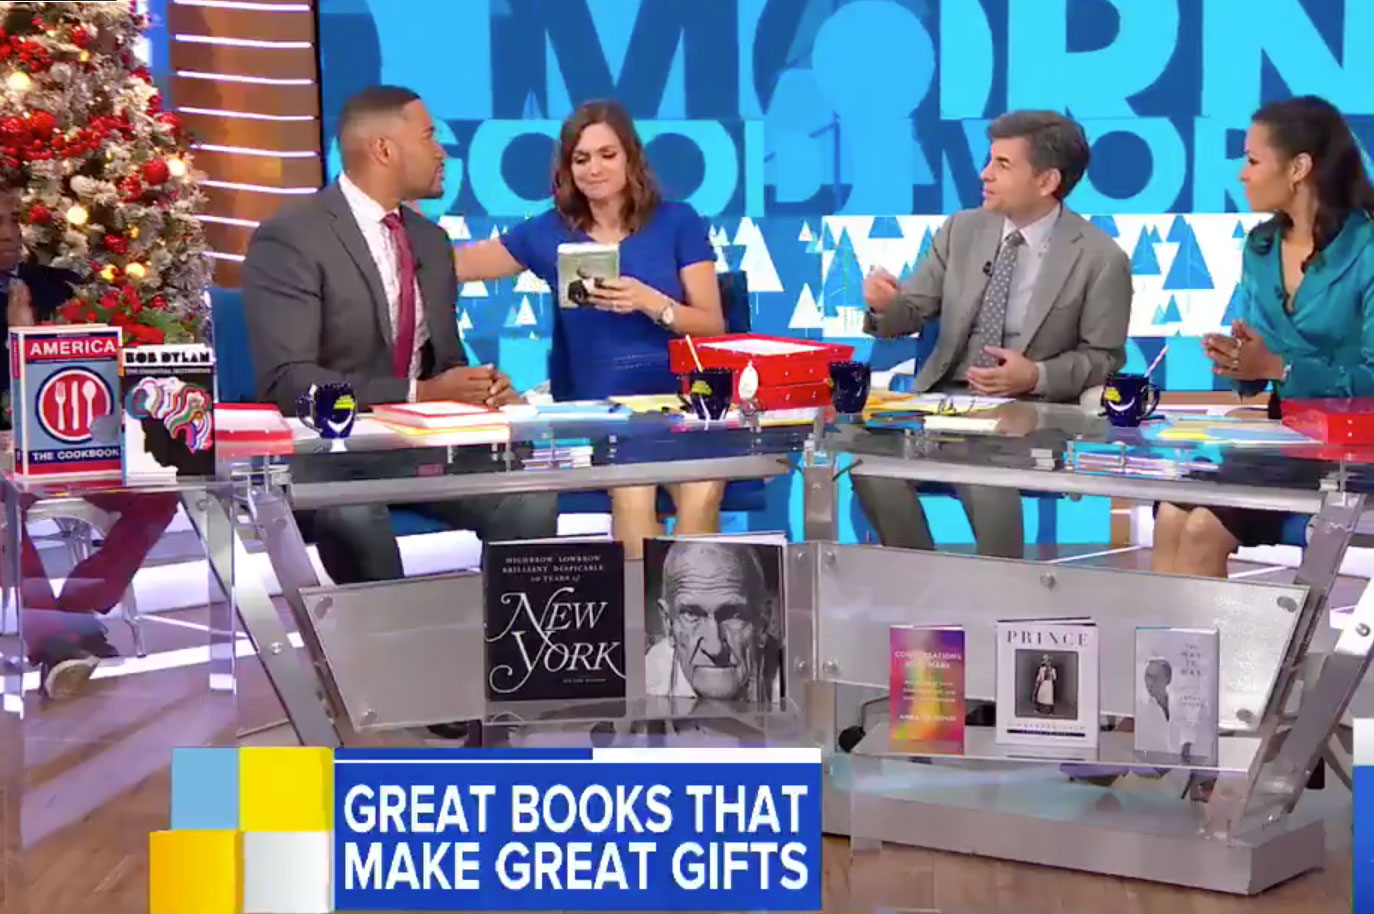 America the Cookbook featured in Good Morning America's Great Books that Make Great Gifts section for Christmas 2017